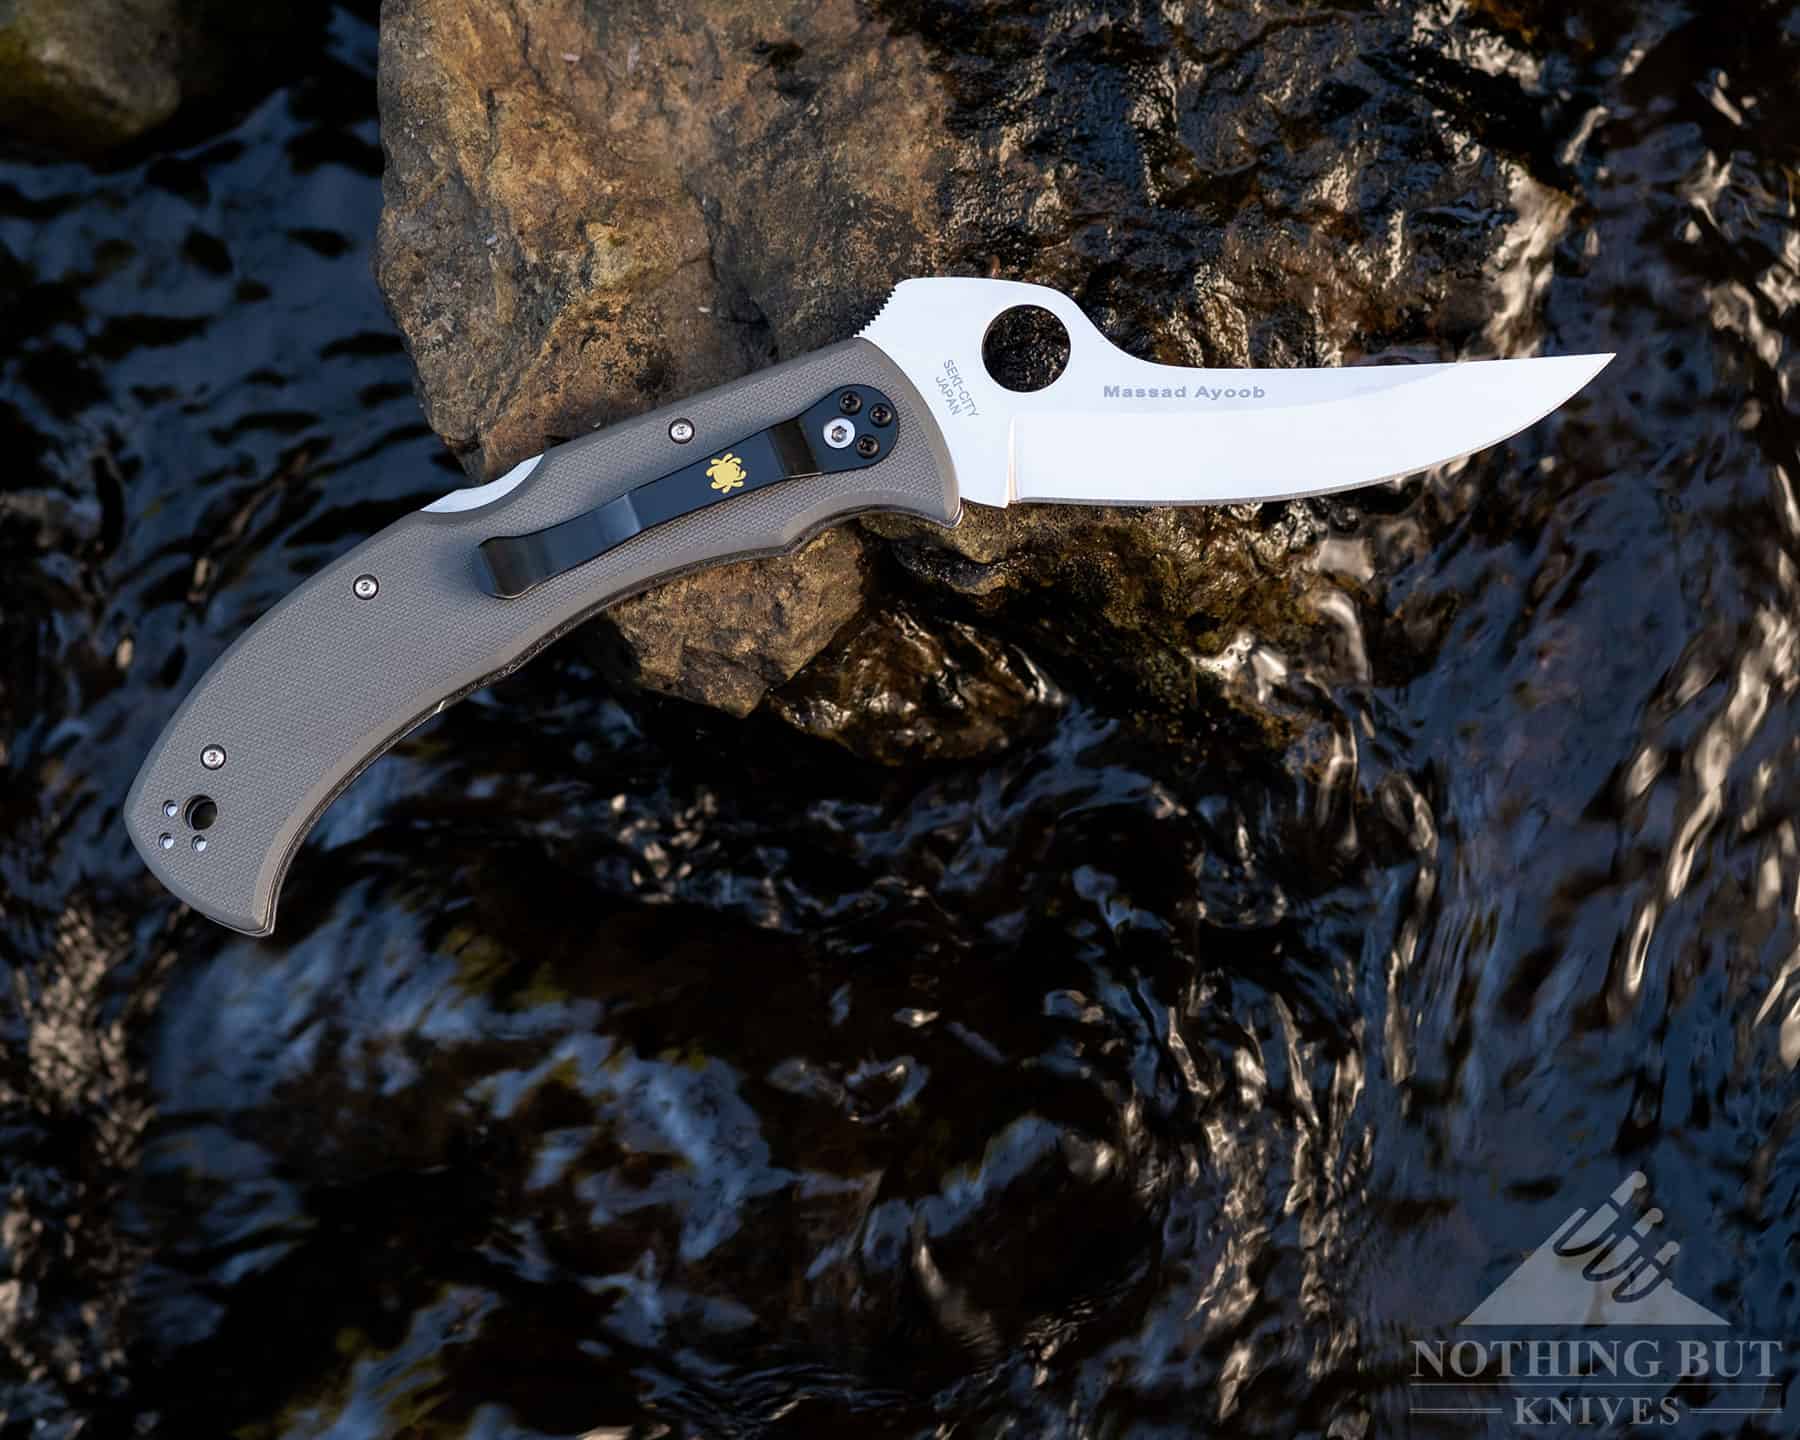 Massad Ayoob's vision for this knife is clear. The C60 is a capable tool that can be easily concealed, even when concealing a handgun might present more difficulties. 